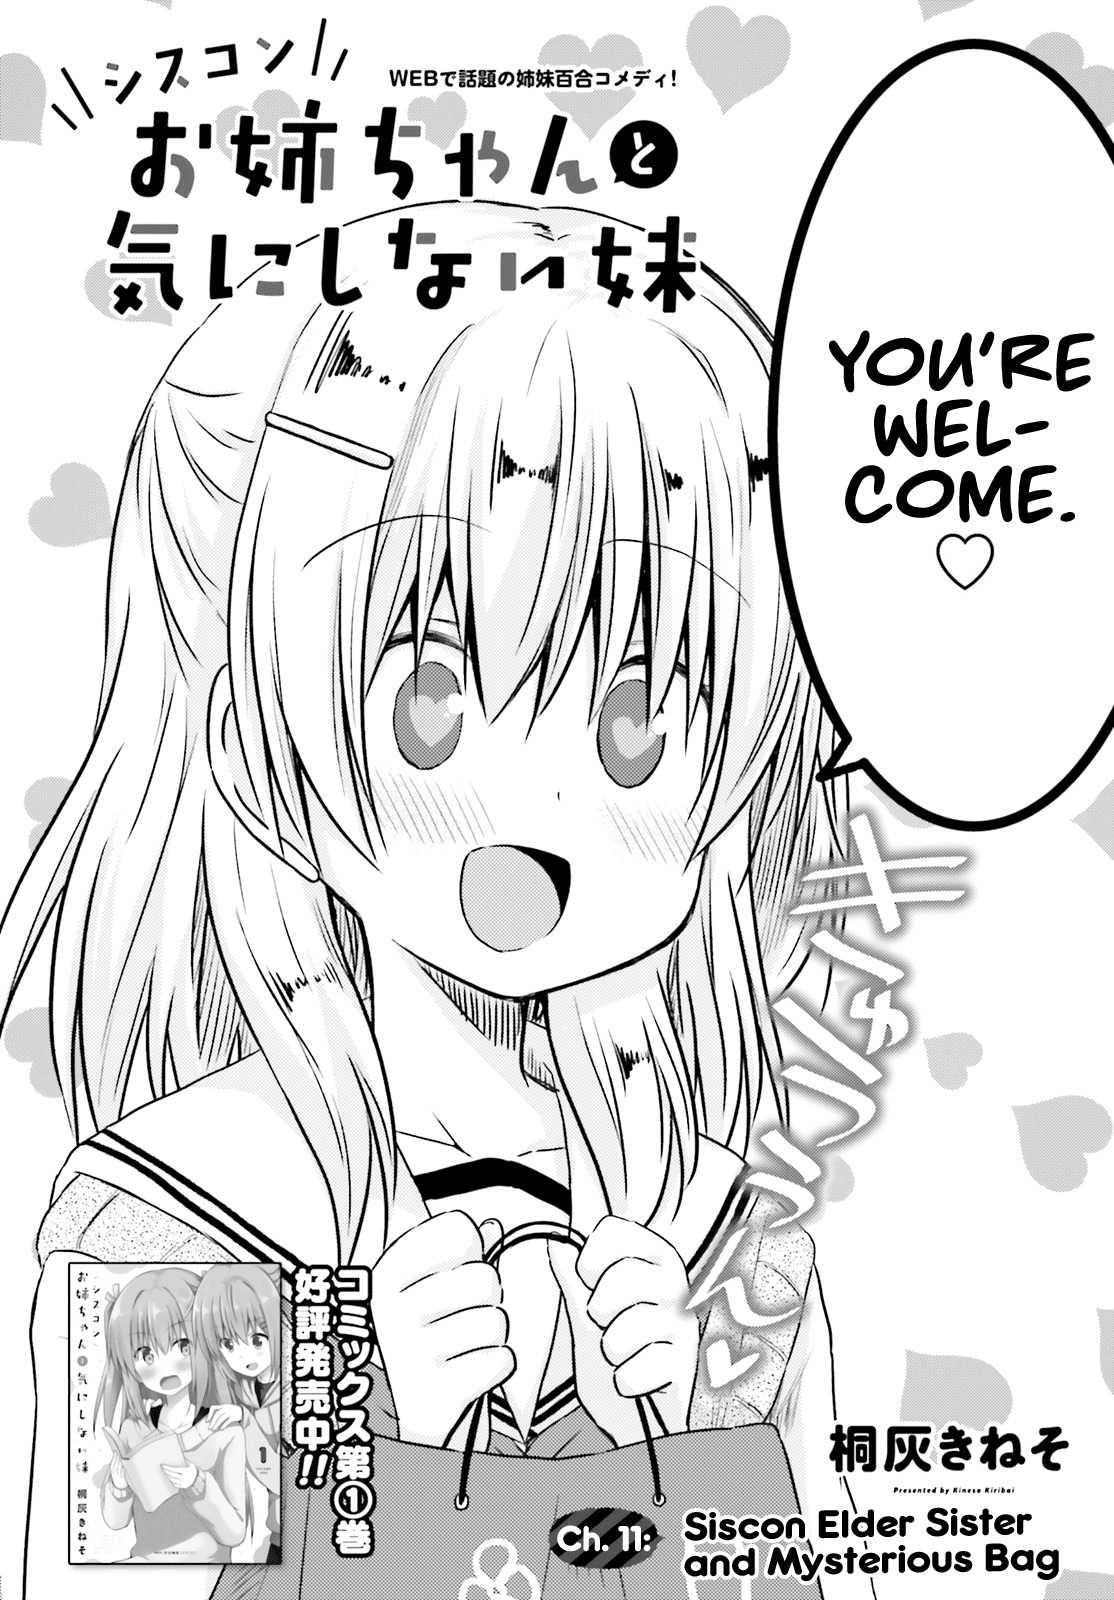 Her Elder Sister Has a Crush on Her, But She Doesn't Mind ch.11